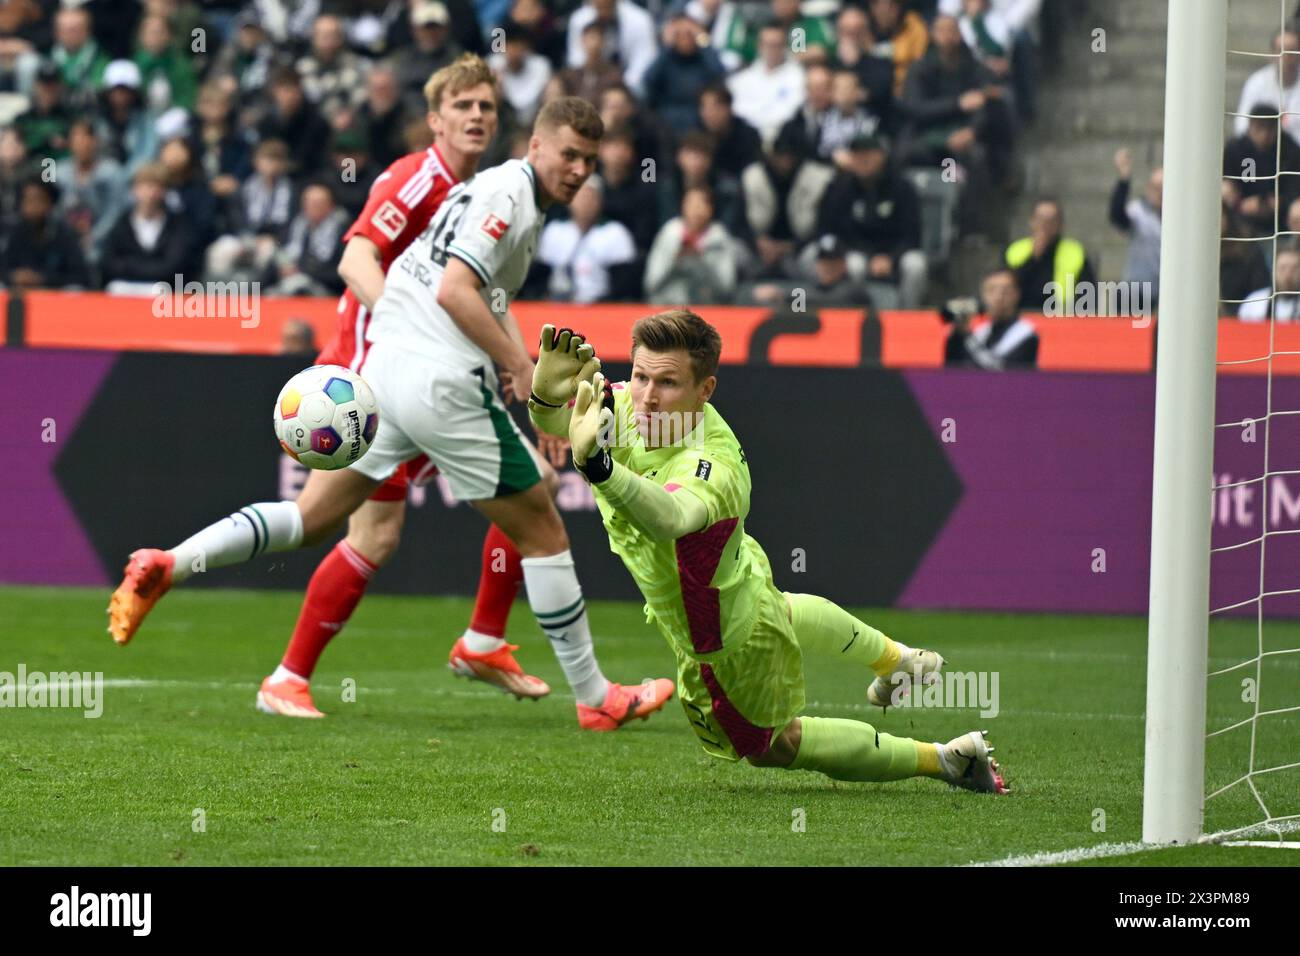 28 April 2024, North Rhine-Westphalia, Mönchengladbach: Soccer: Bundesliga, Borussia Mönchengladbach - 1. FC Union Berlin, Matchday 31, Stadion im Borussia-Park. Mönchengladbach's Moritz Nicolas defends a ball. Photo: Federico Gambarini/dpa - IMPORTANT NOTE: In accordance with the regulations of the DFL German Football League and the DFB German Football Association, it is prohibited to utilize or have utilized photographs taken in the stadium and/or of the match in the form of sequential images and/or video-like photo series. Stock Photo